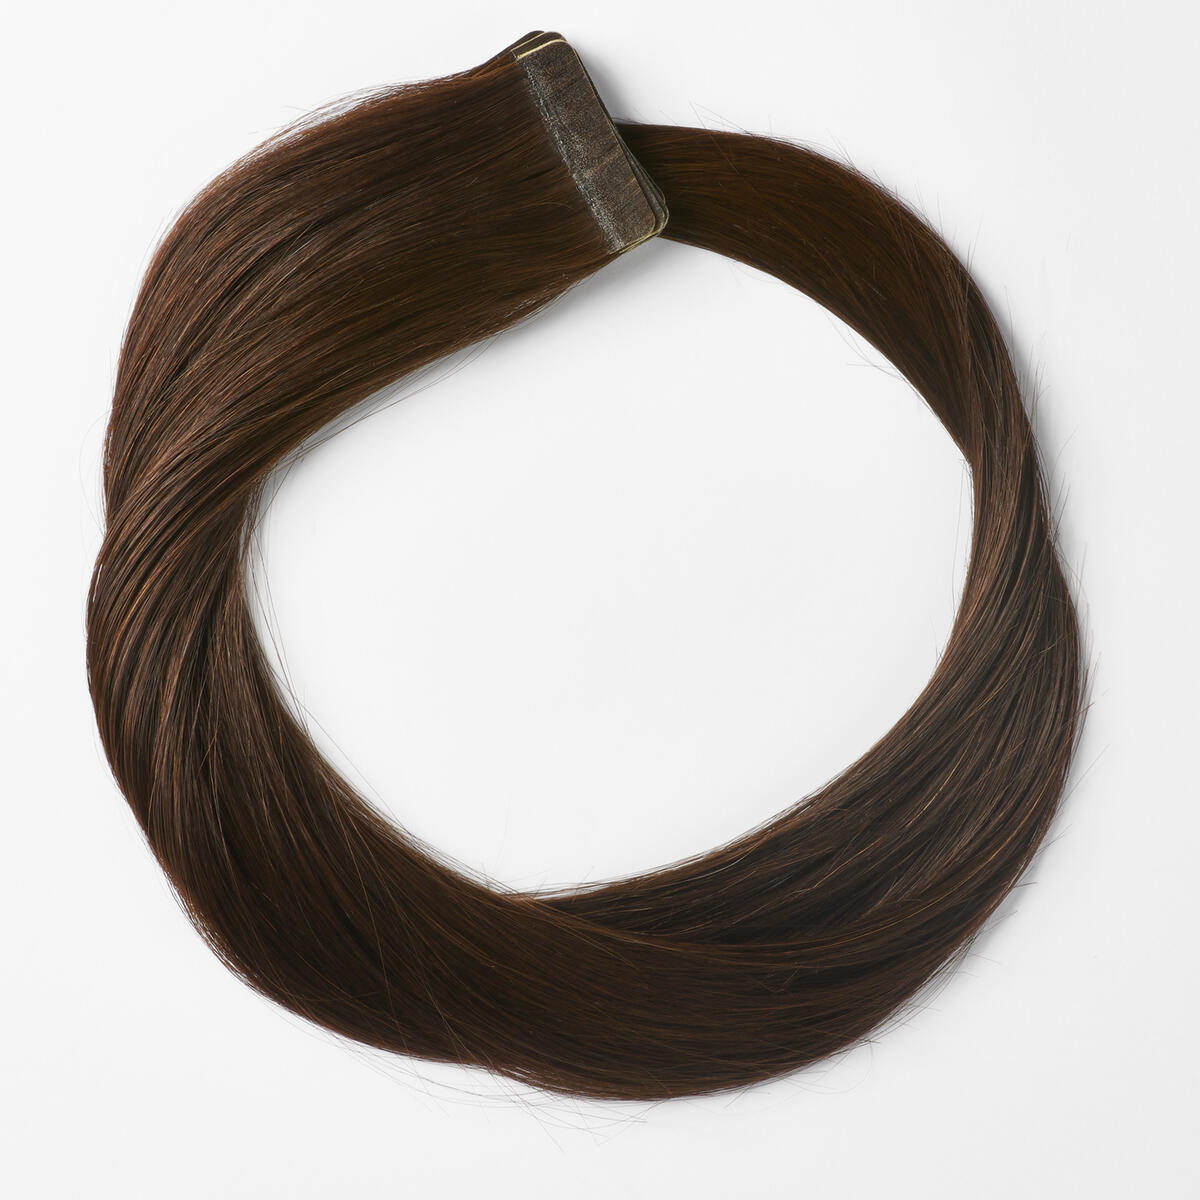 Basic Tape Extensions Classic 4 2.3 Chocolate Brown 60 cm